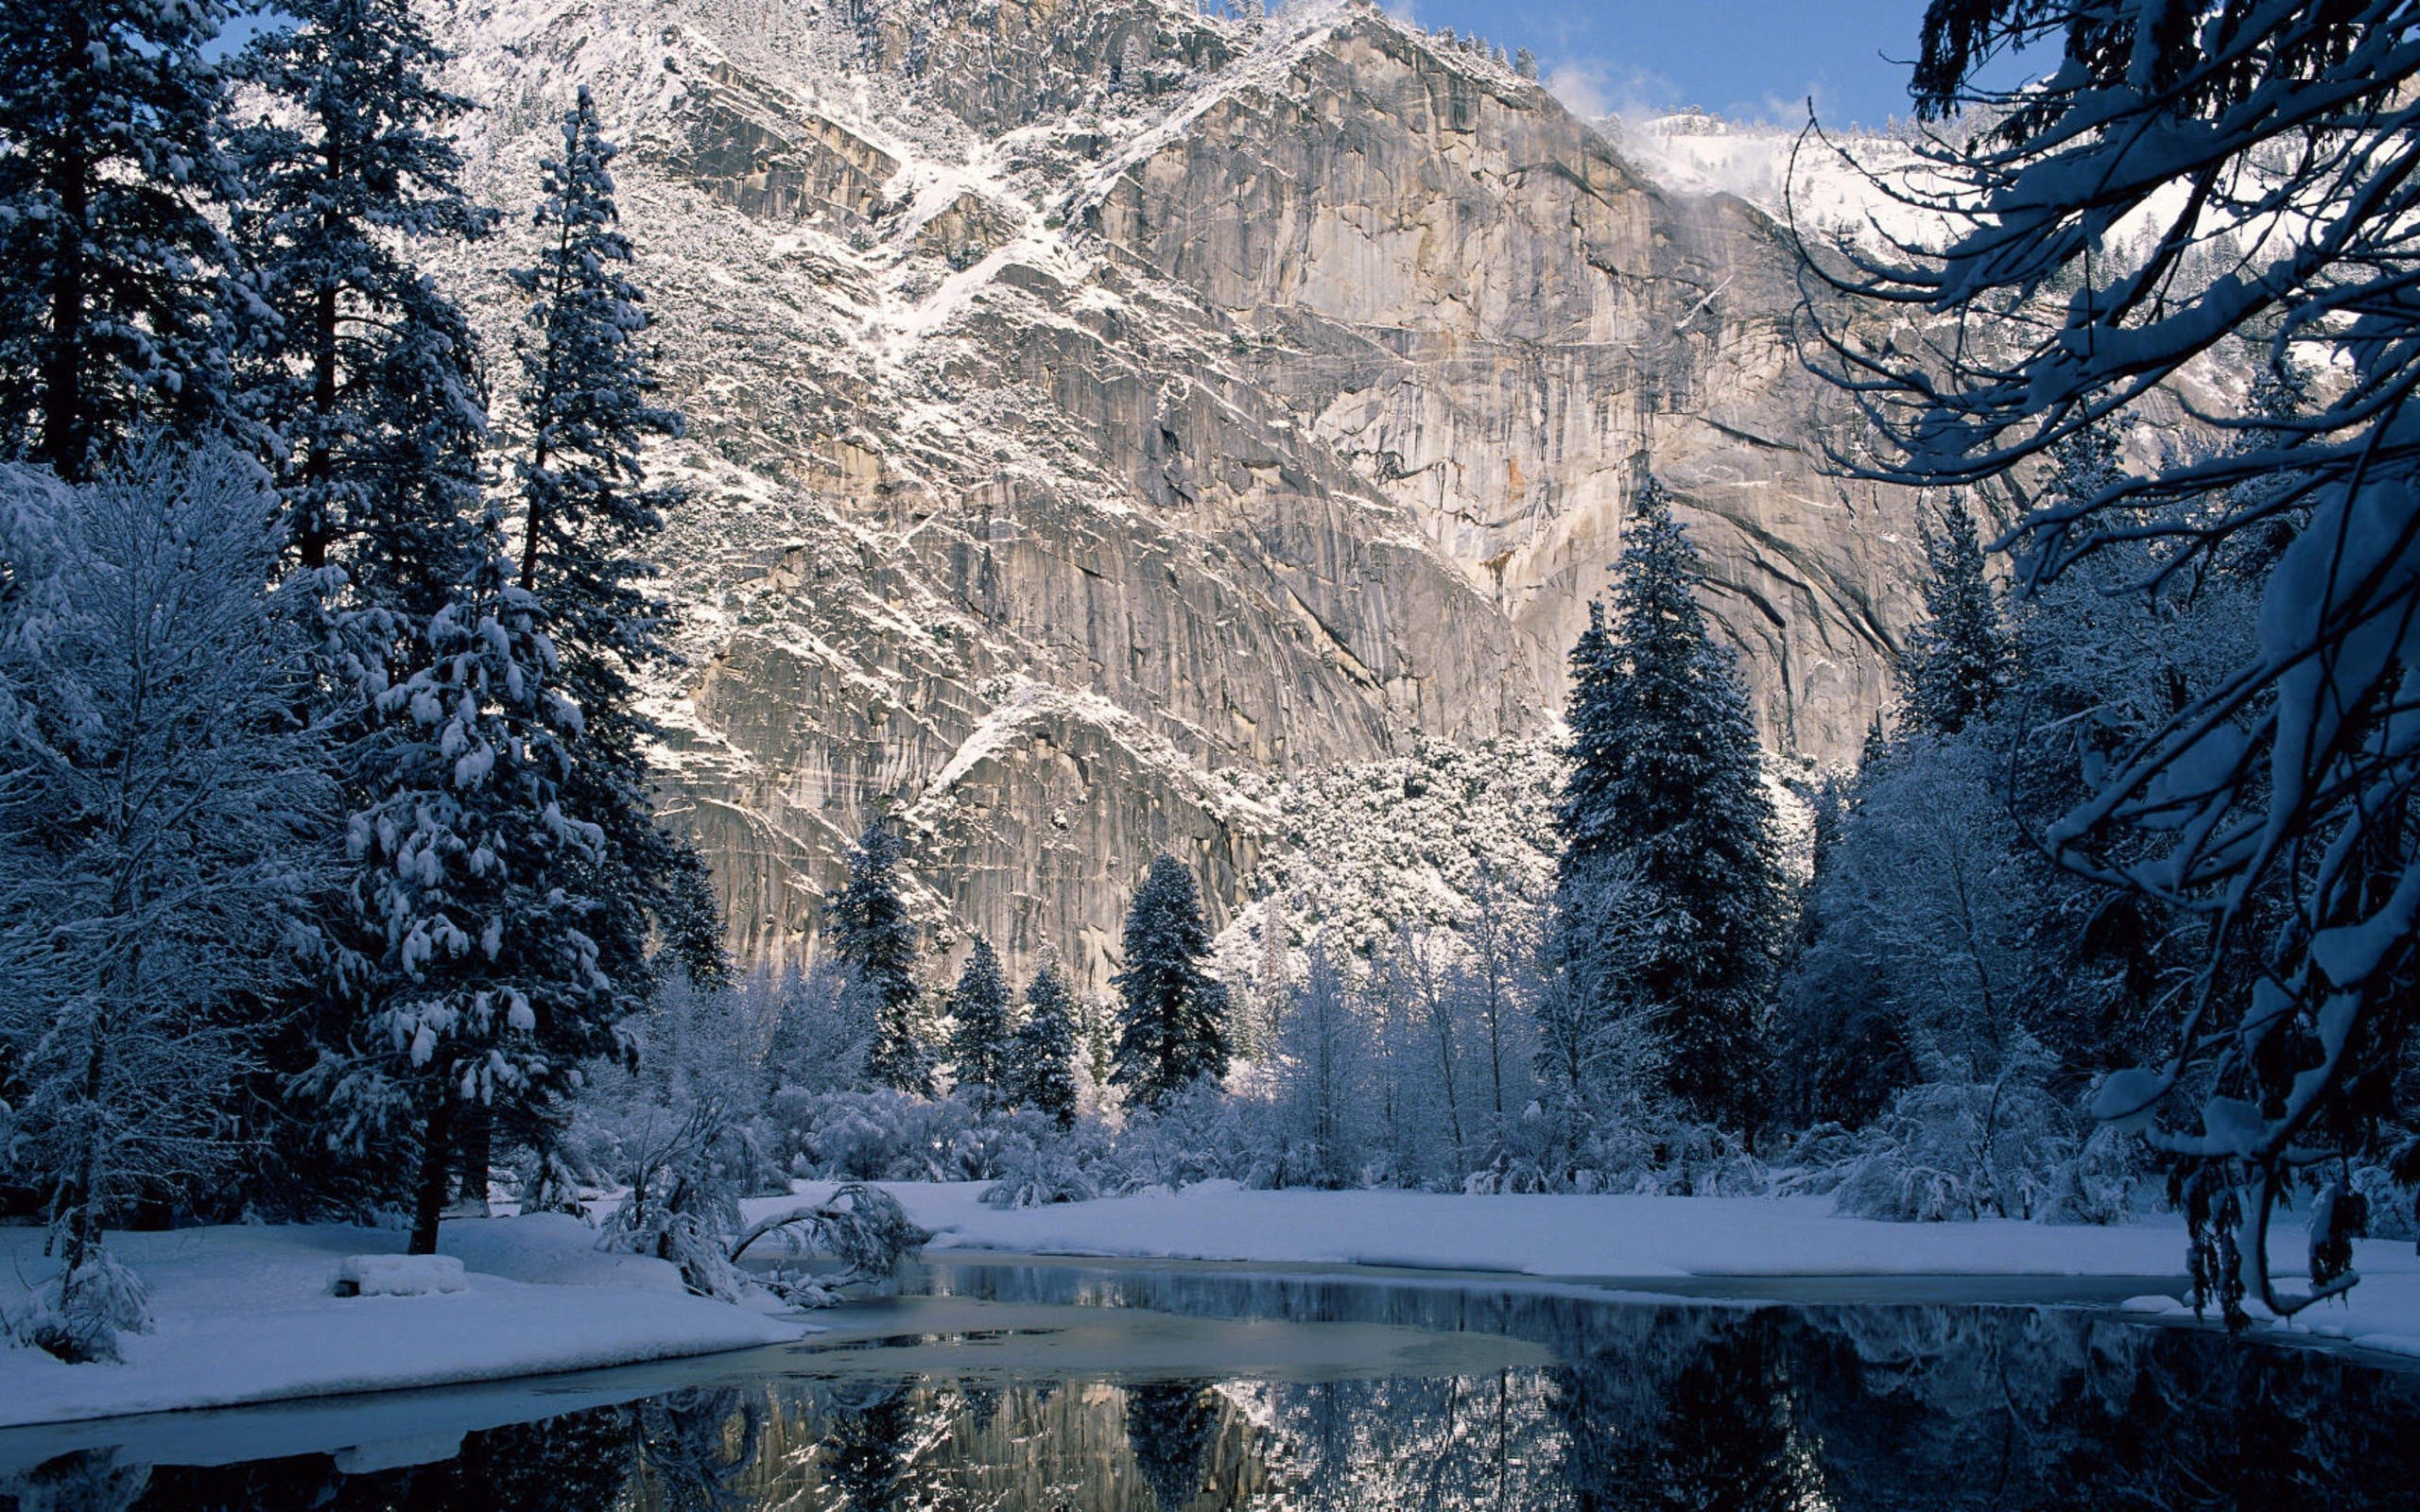 General 2560x1600 mountains winter landscape river nature rocks cold snow ice outdoors water